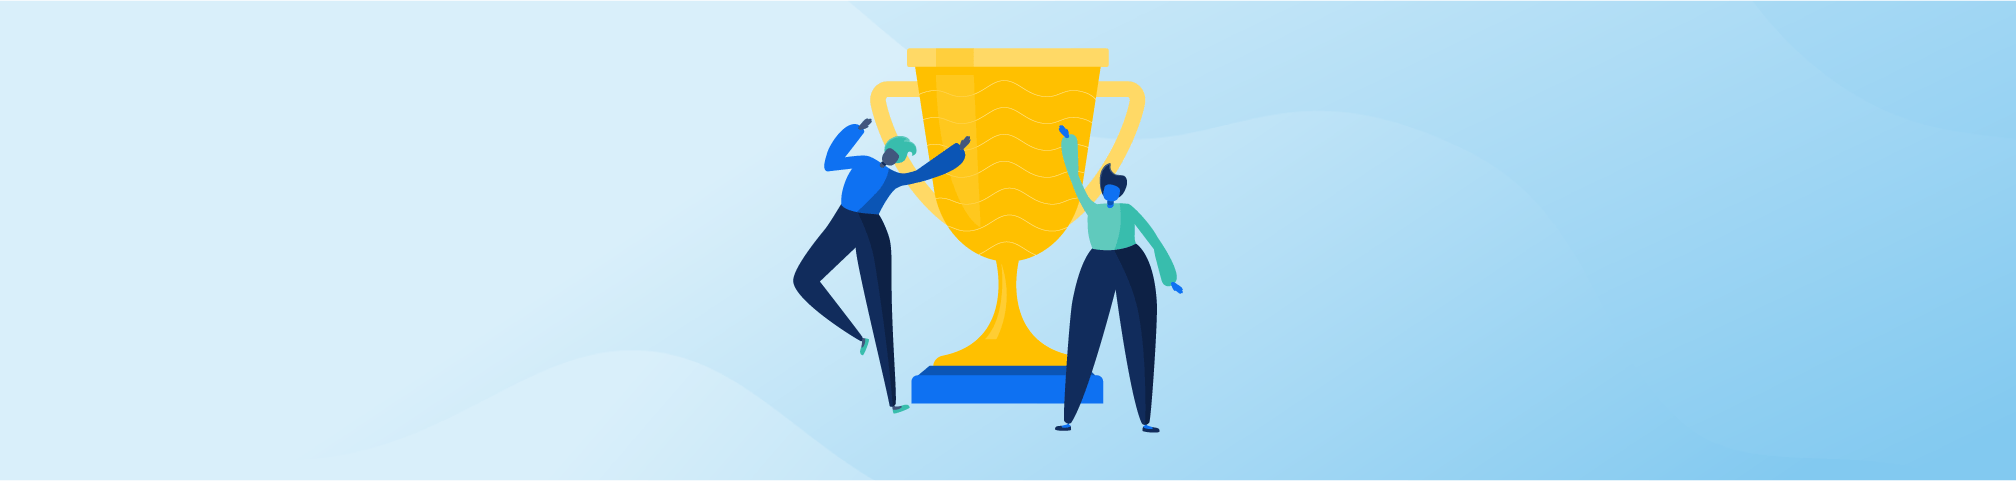 Illustration of two people next to trophy